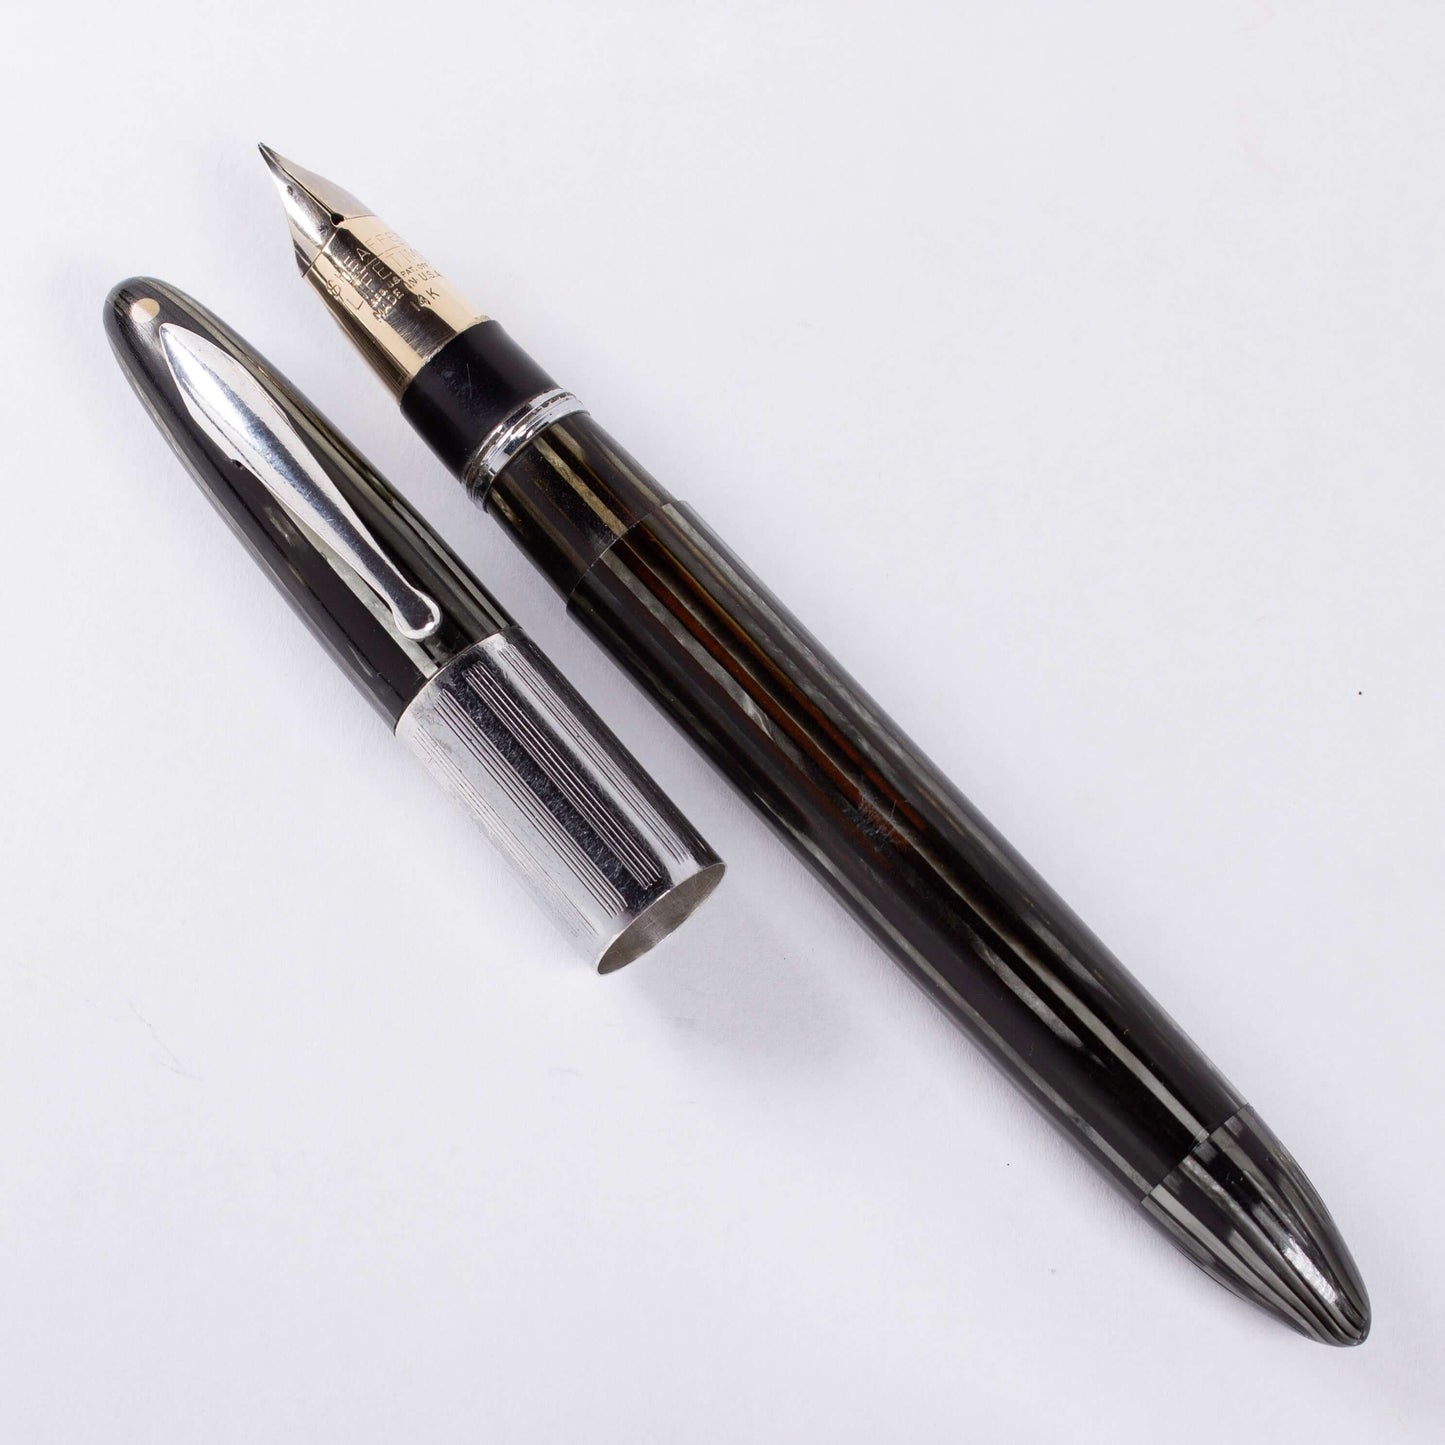 ${titleType: Vintage Vac-Fil Fountain Pen Product name: Sheaffer Triumph Vacuum-Fil Manufacturer and Year: 1940's Length: 5 1/8 inch Filling System: Vacuum-Fil, Plunger, restored with new section and piston Color/Pattern: Grey Pearl Nib Type/Condition and